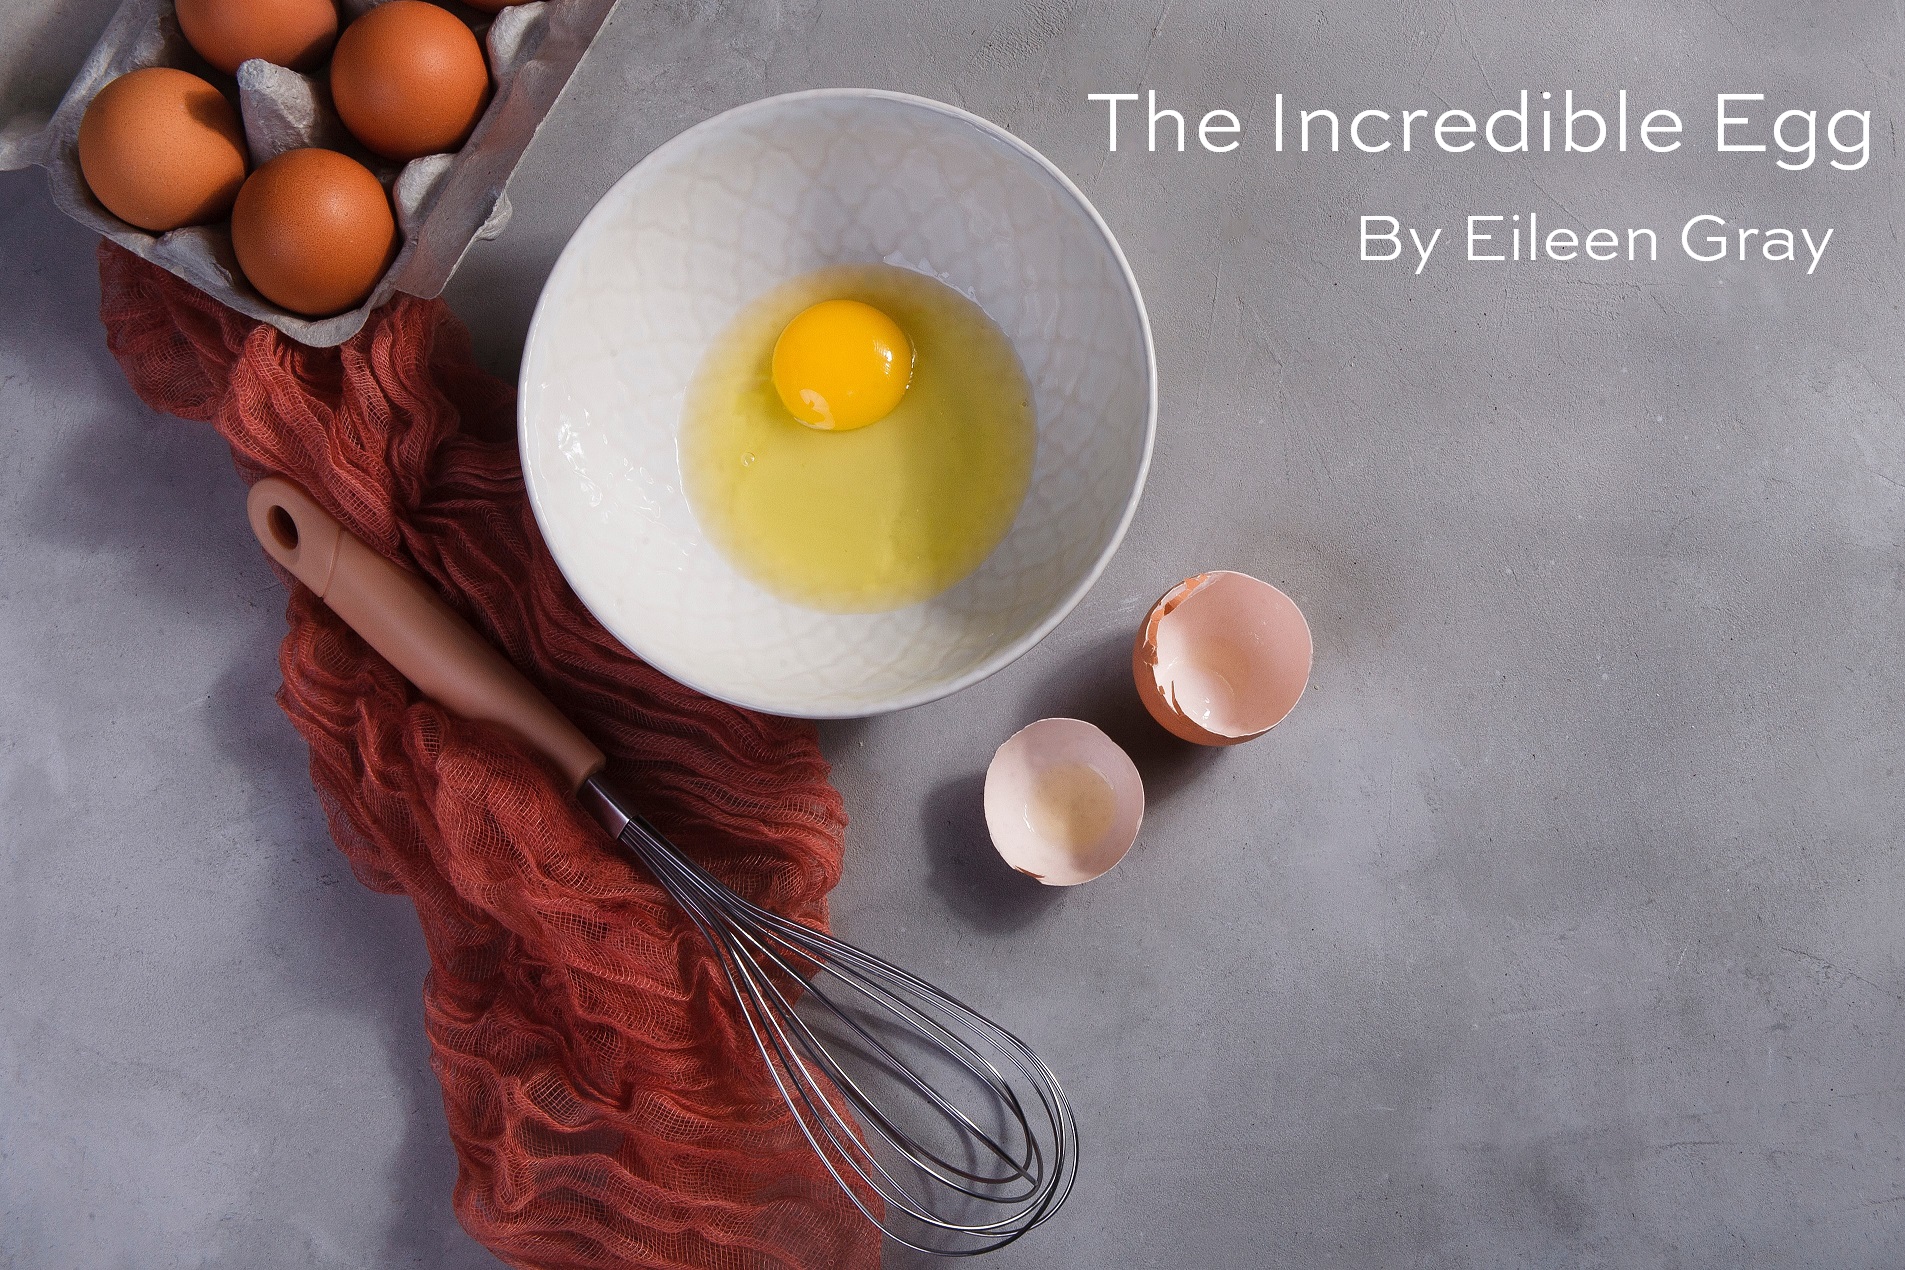 The Incredible Egg - American Cake Decorating